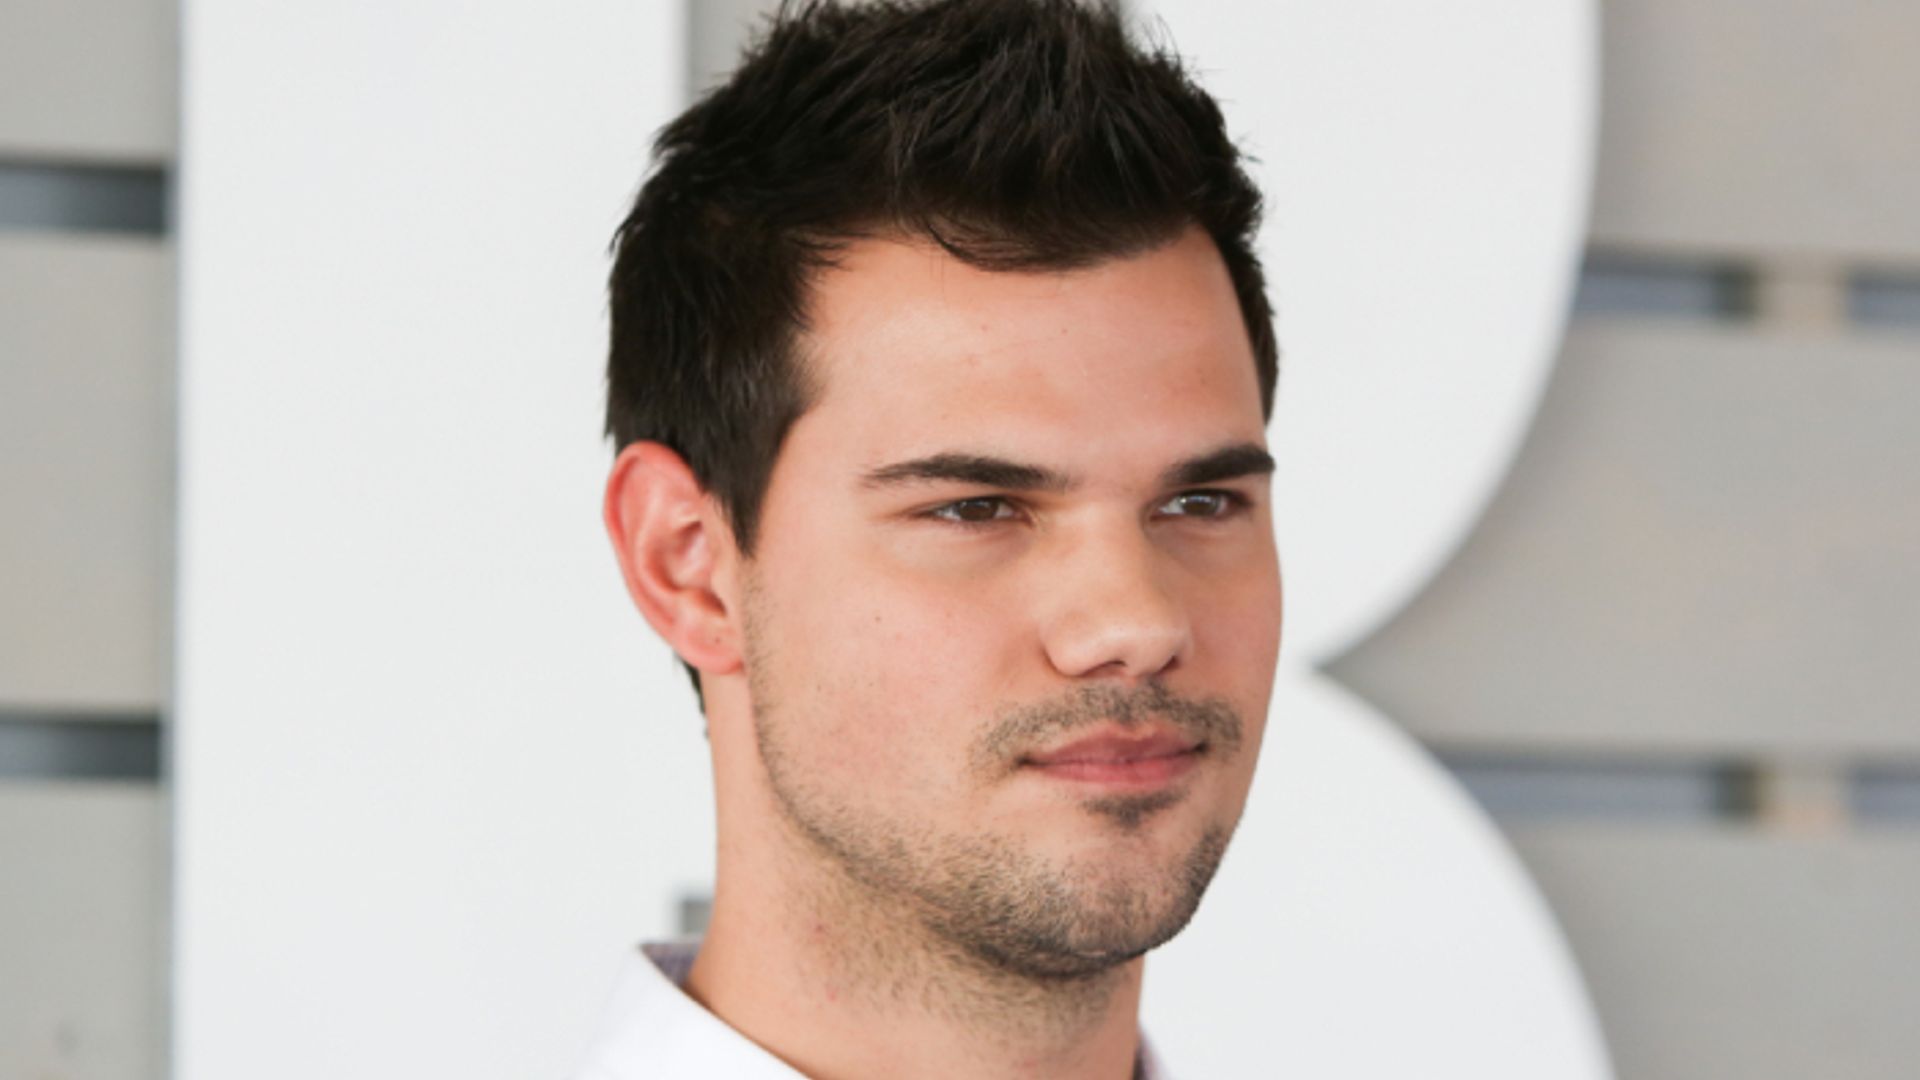 Taylor Lautner Spills On His Relationship With Taylor Swift | John Stamos,  Lea Michele, Taylor Lautner, Taylor Swift | Just Jared Jr.